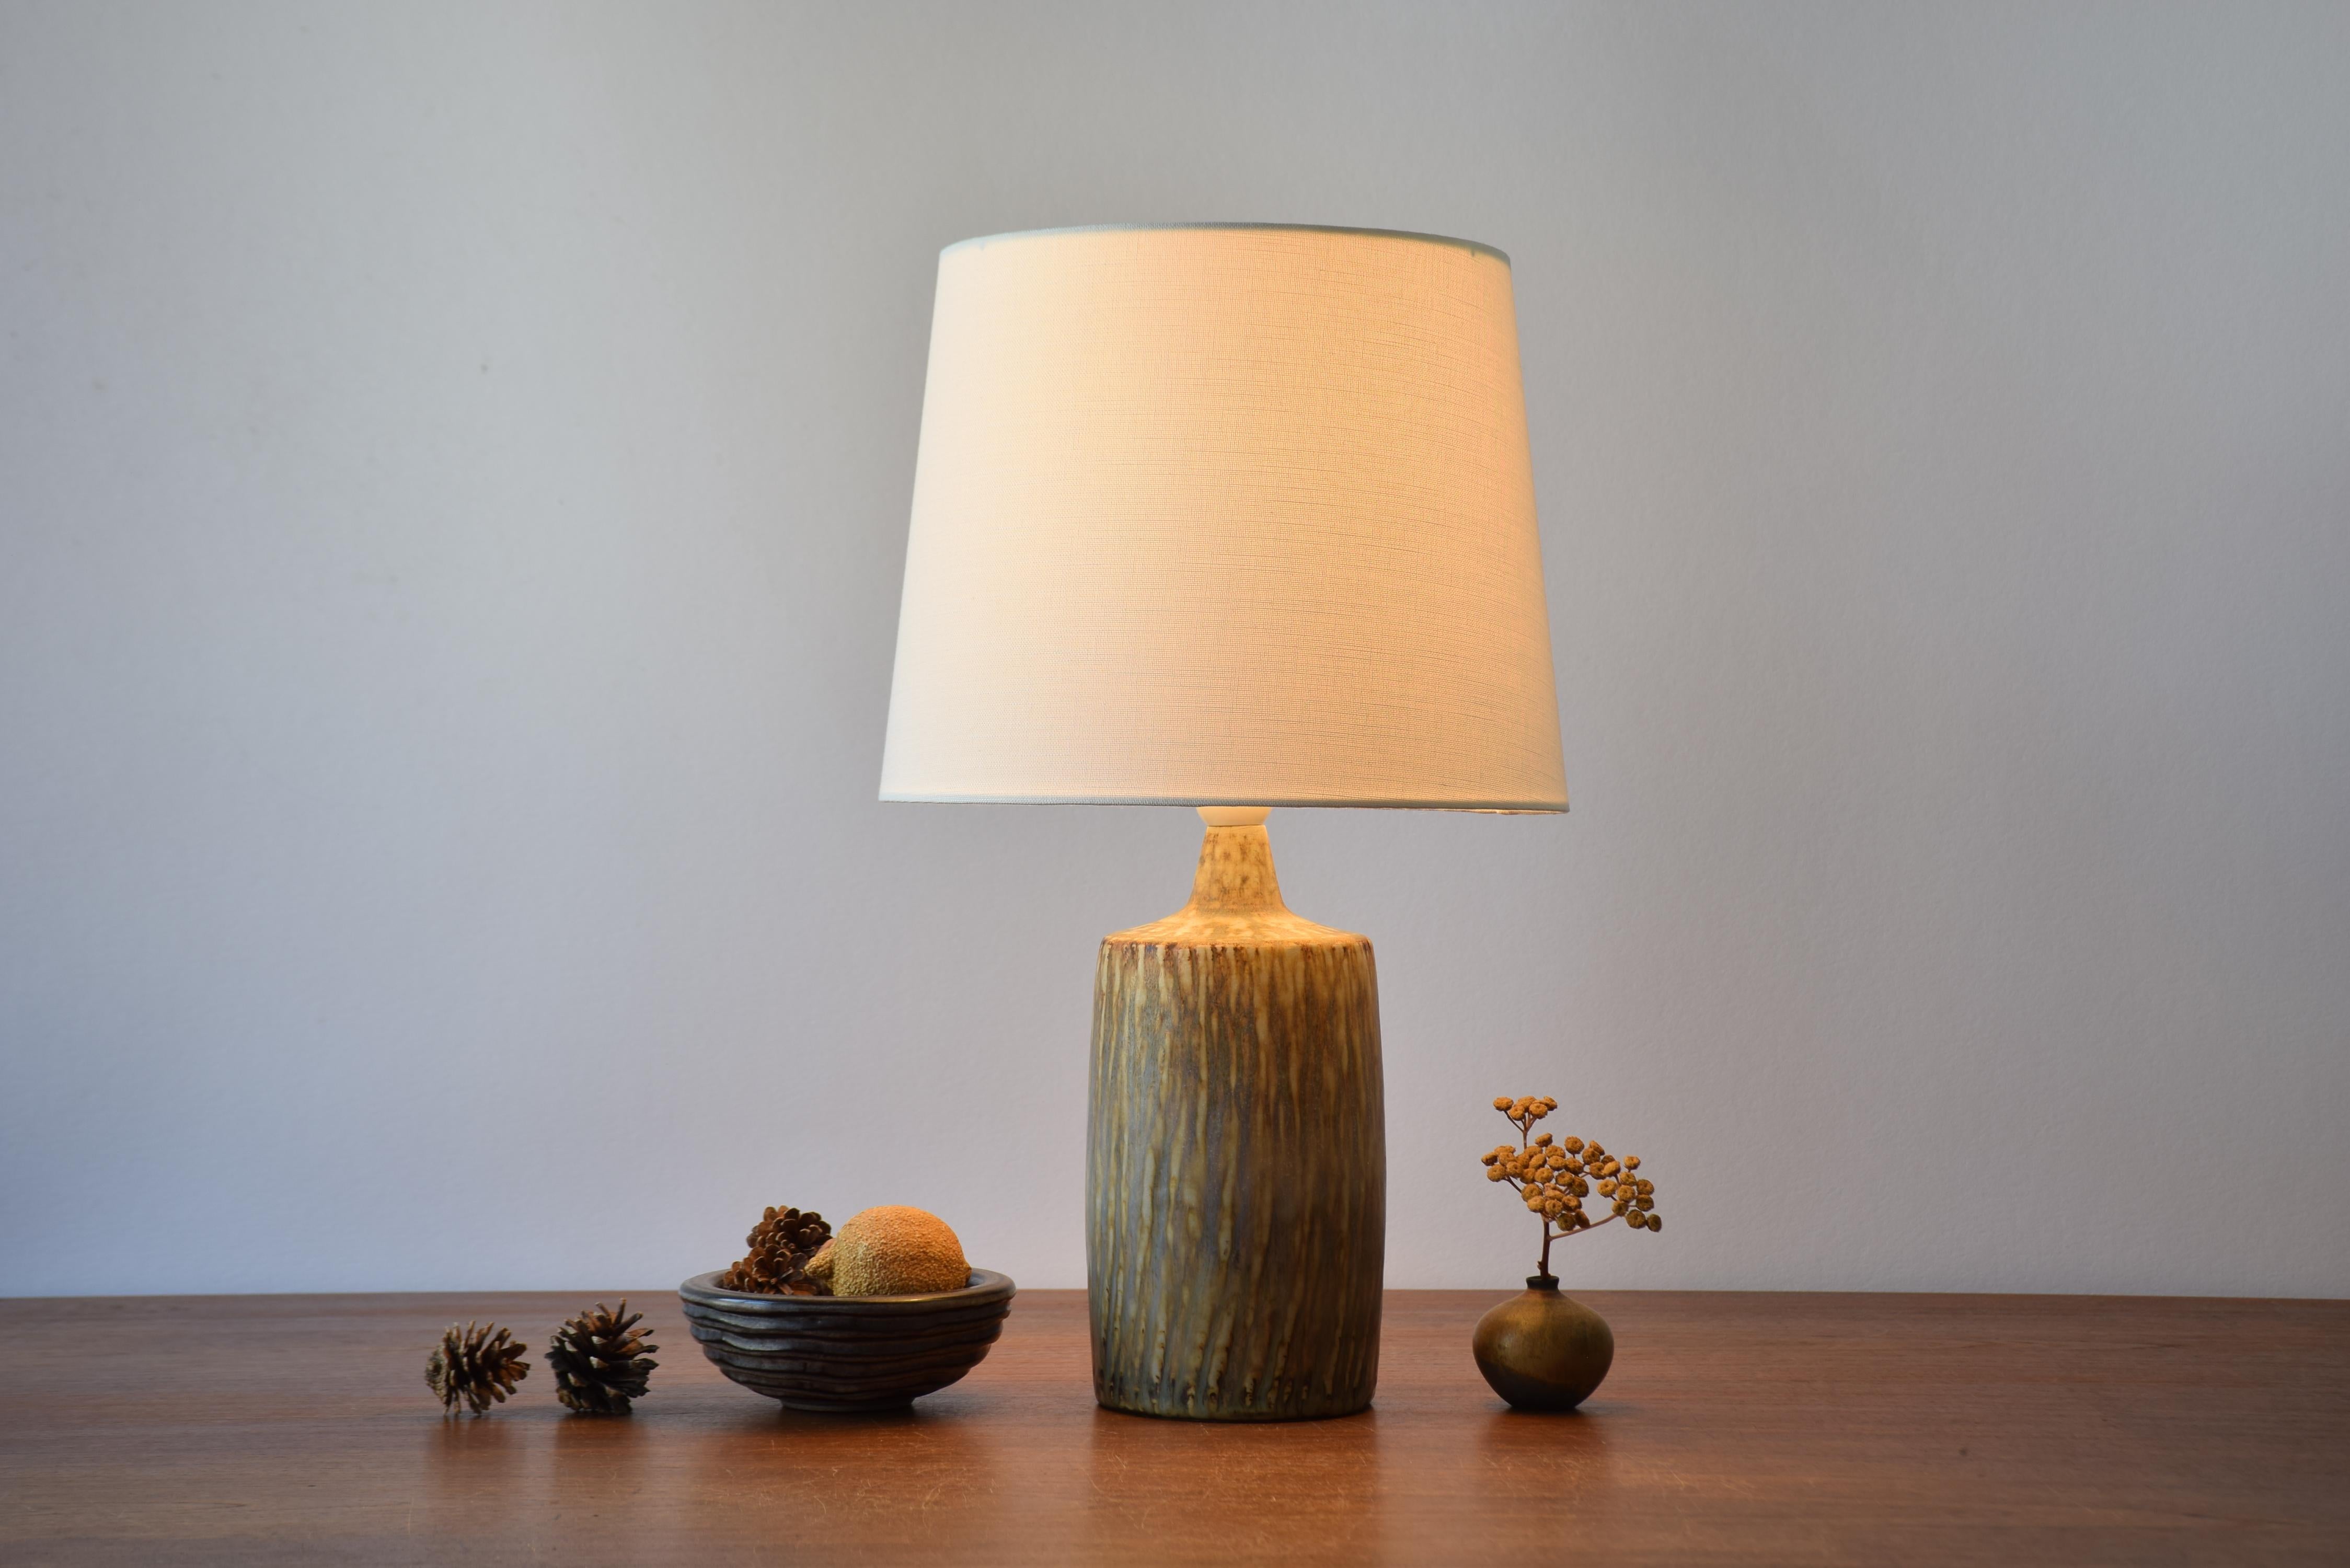 Ceramic table lamp by Gunnar Nylund for Rörstrand, Sweden.
It´s part of the 